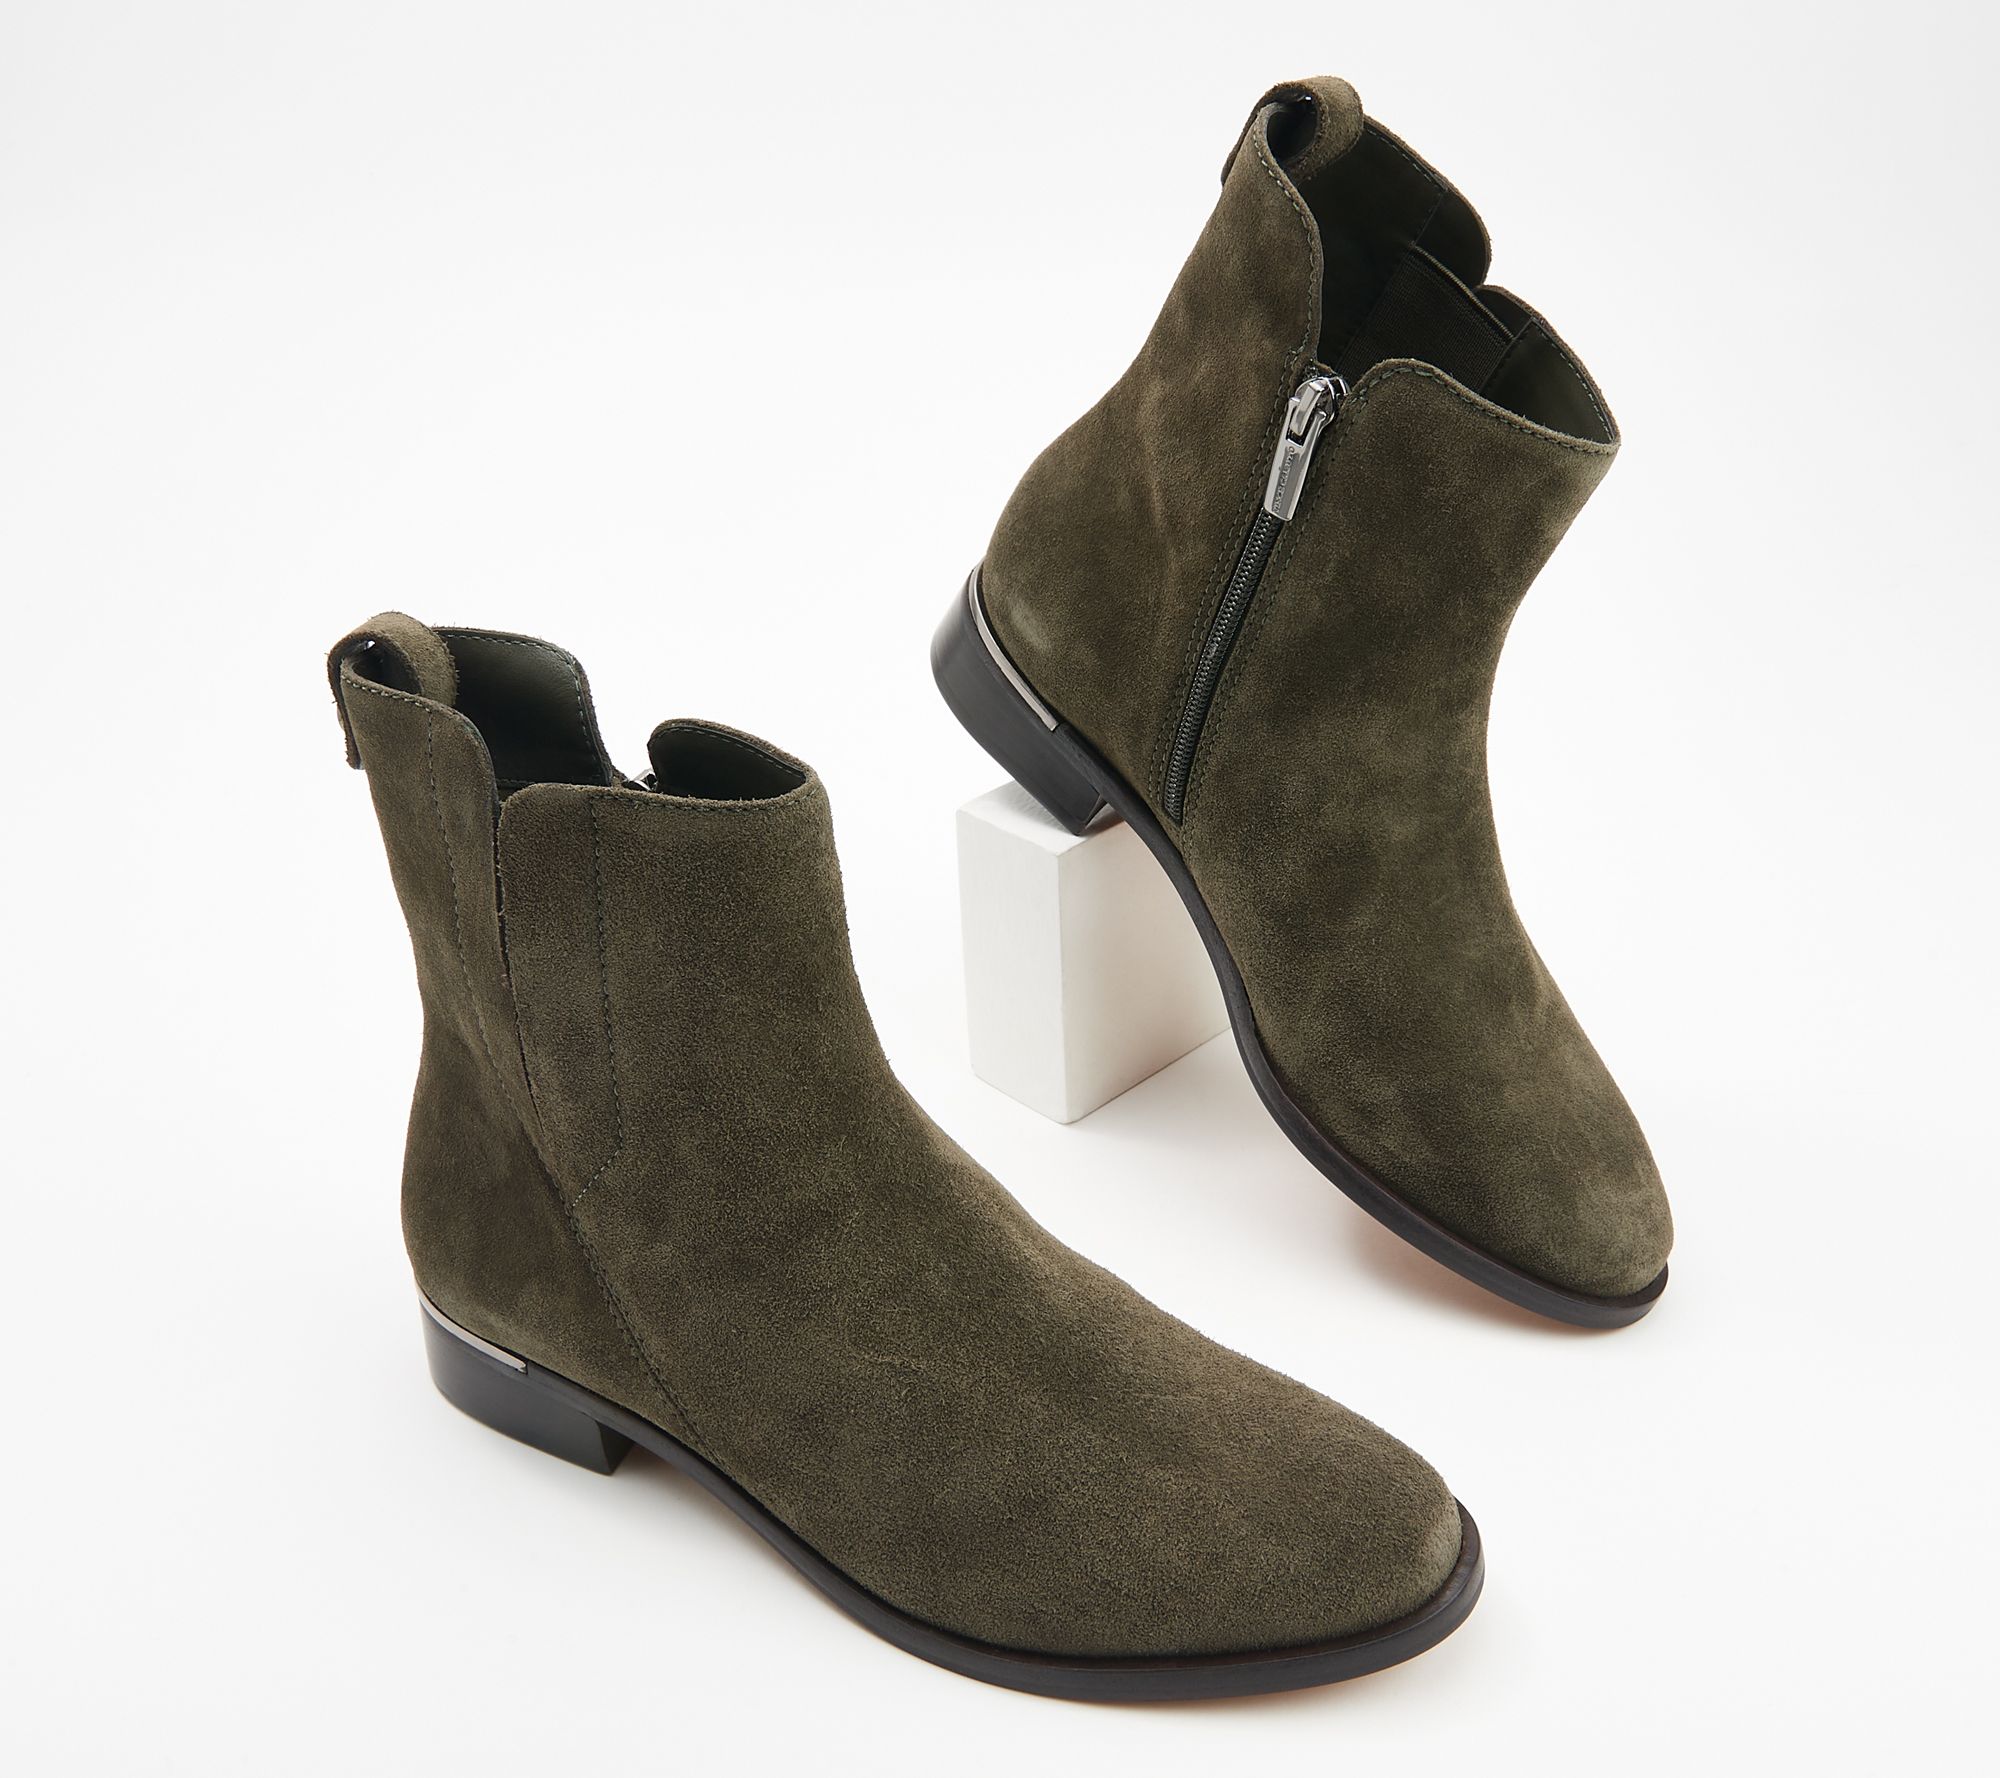 Vince Camuto Leather or Suede Ankle Boots - Okalinra 